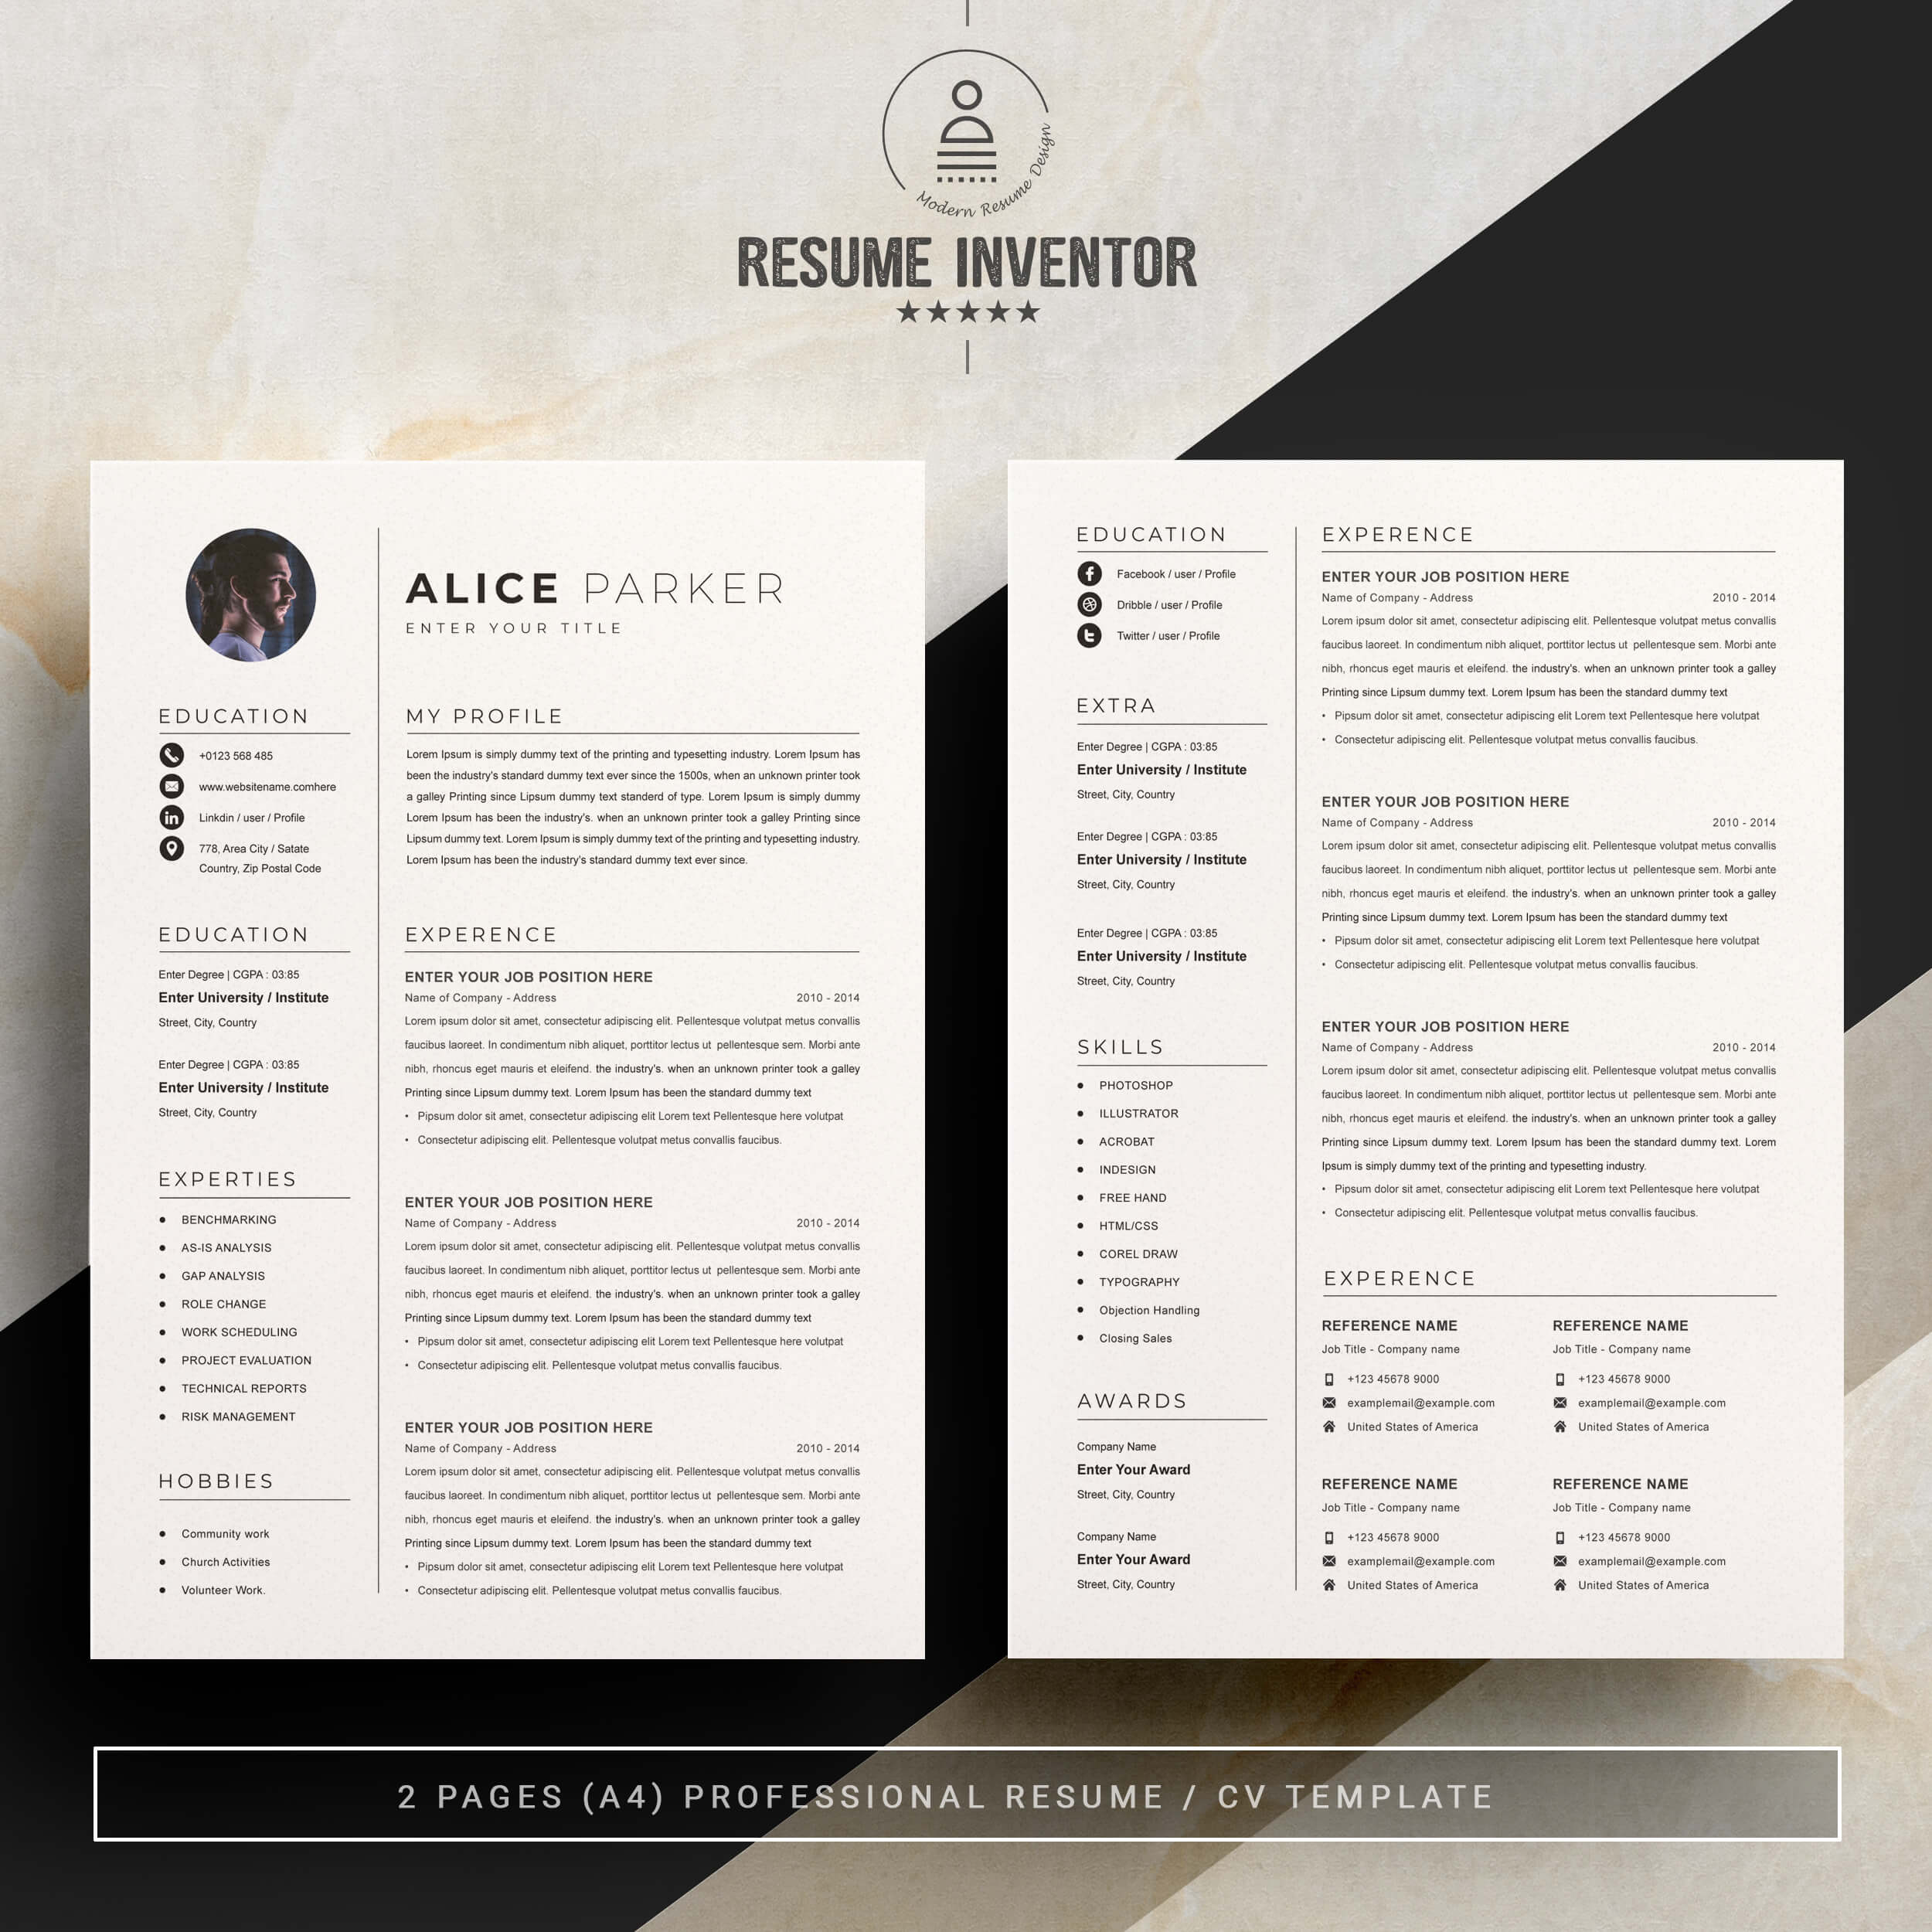 Clean and Elegant Resume Template for Creative Professionals in Design, Advertising, and Media Industries preview image.